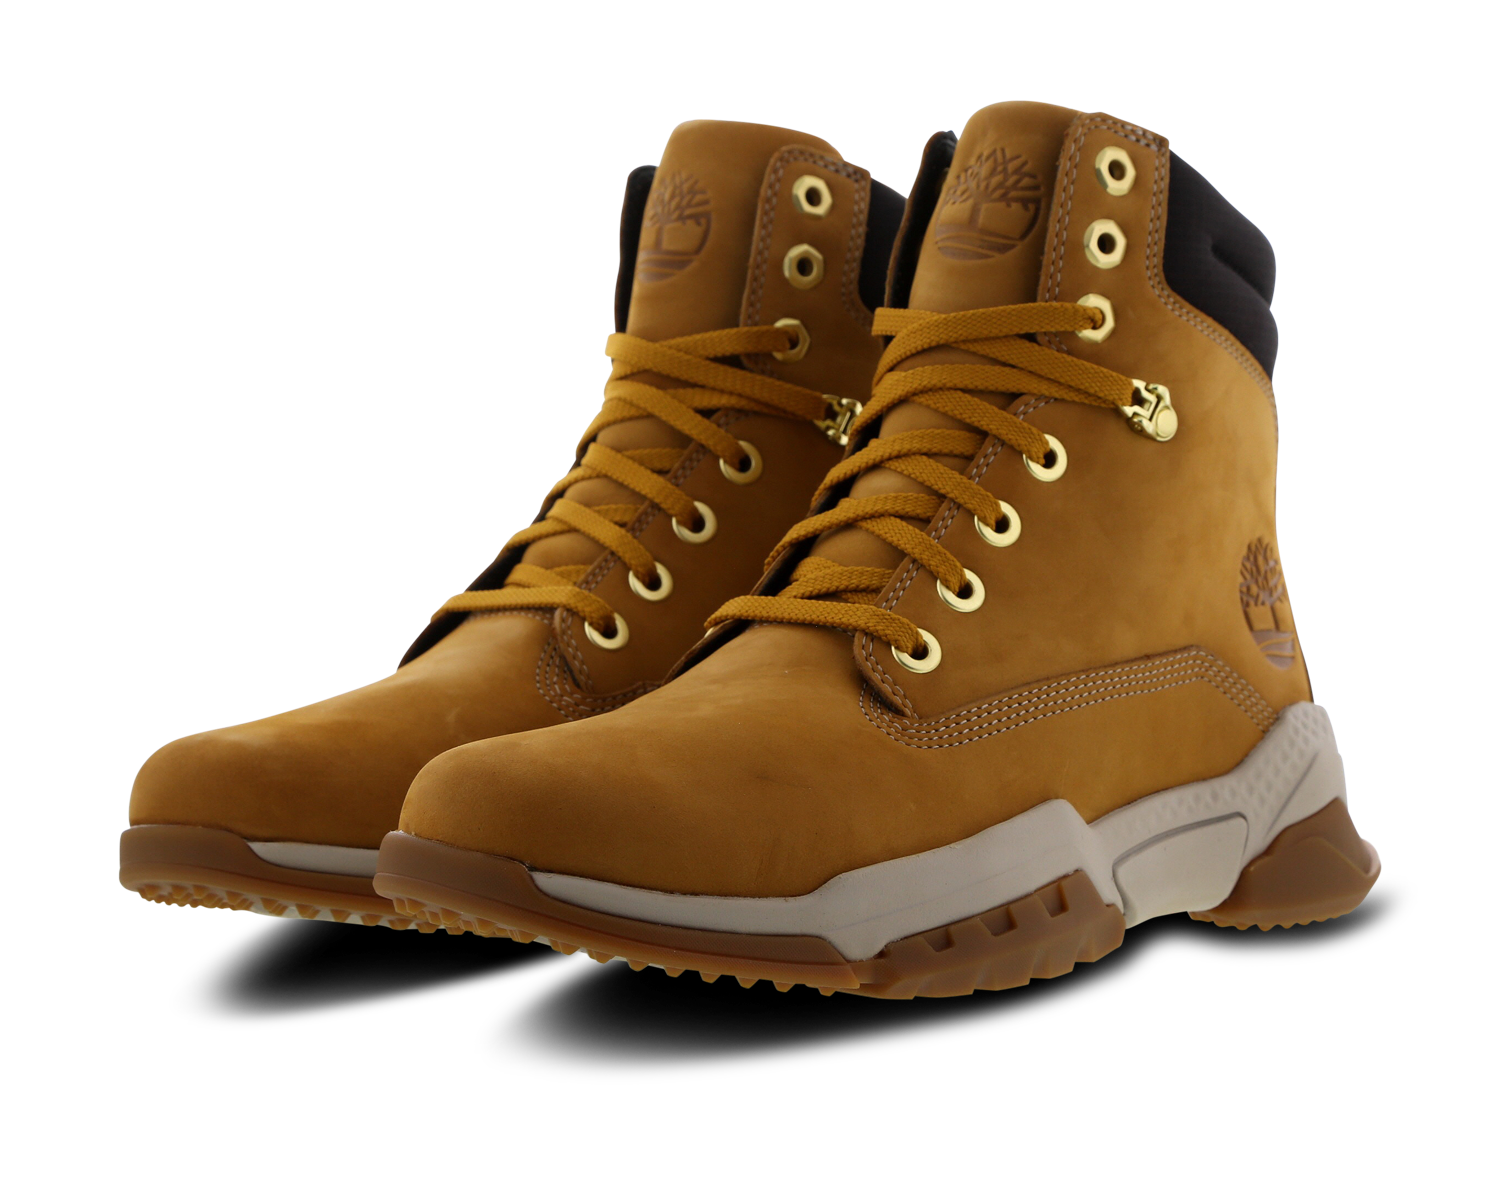 timberland force boots